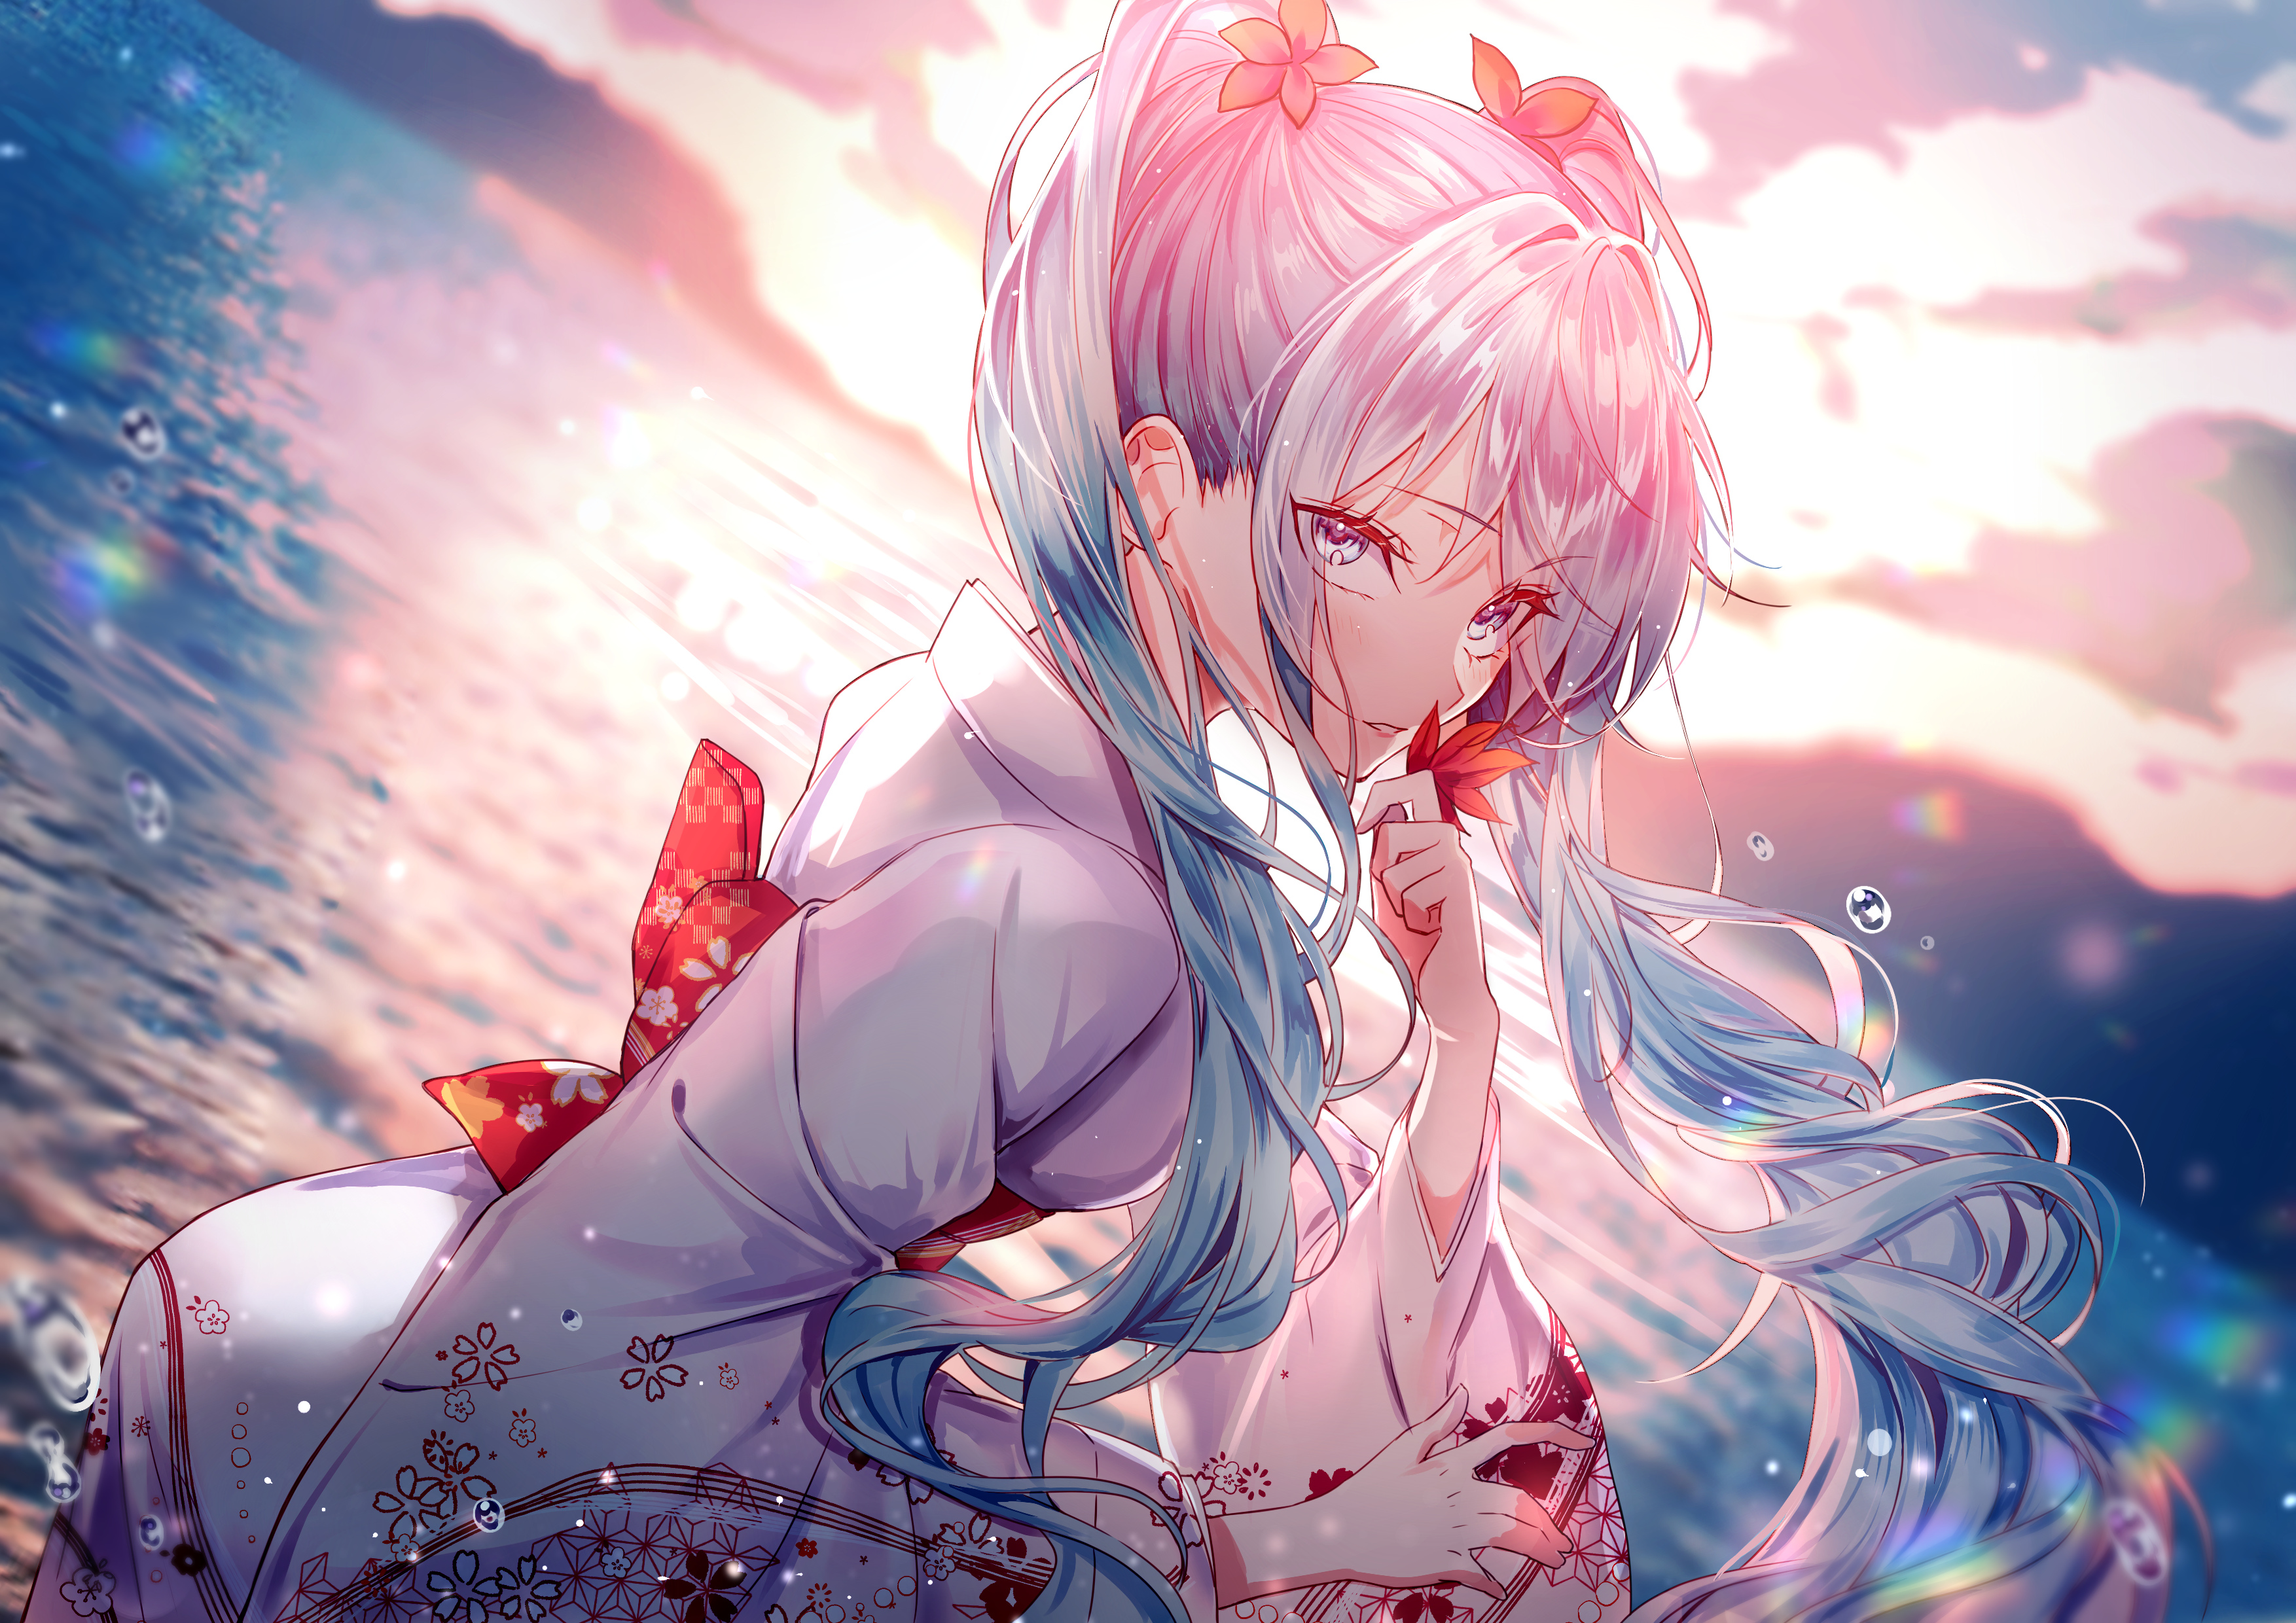 Beautiful anime girl with blue hair posing with butterflies HD wallpaper  download